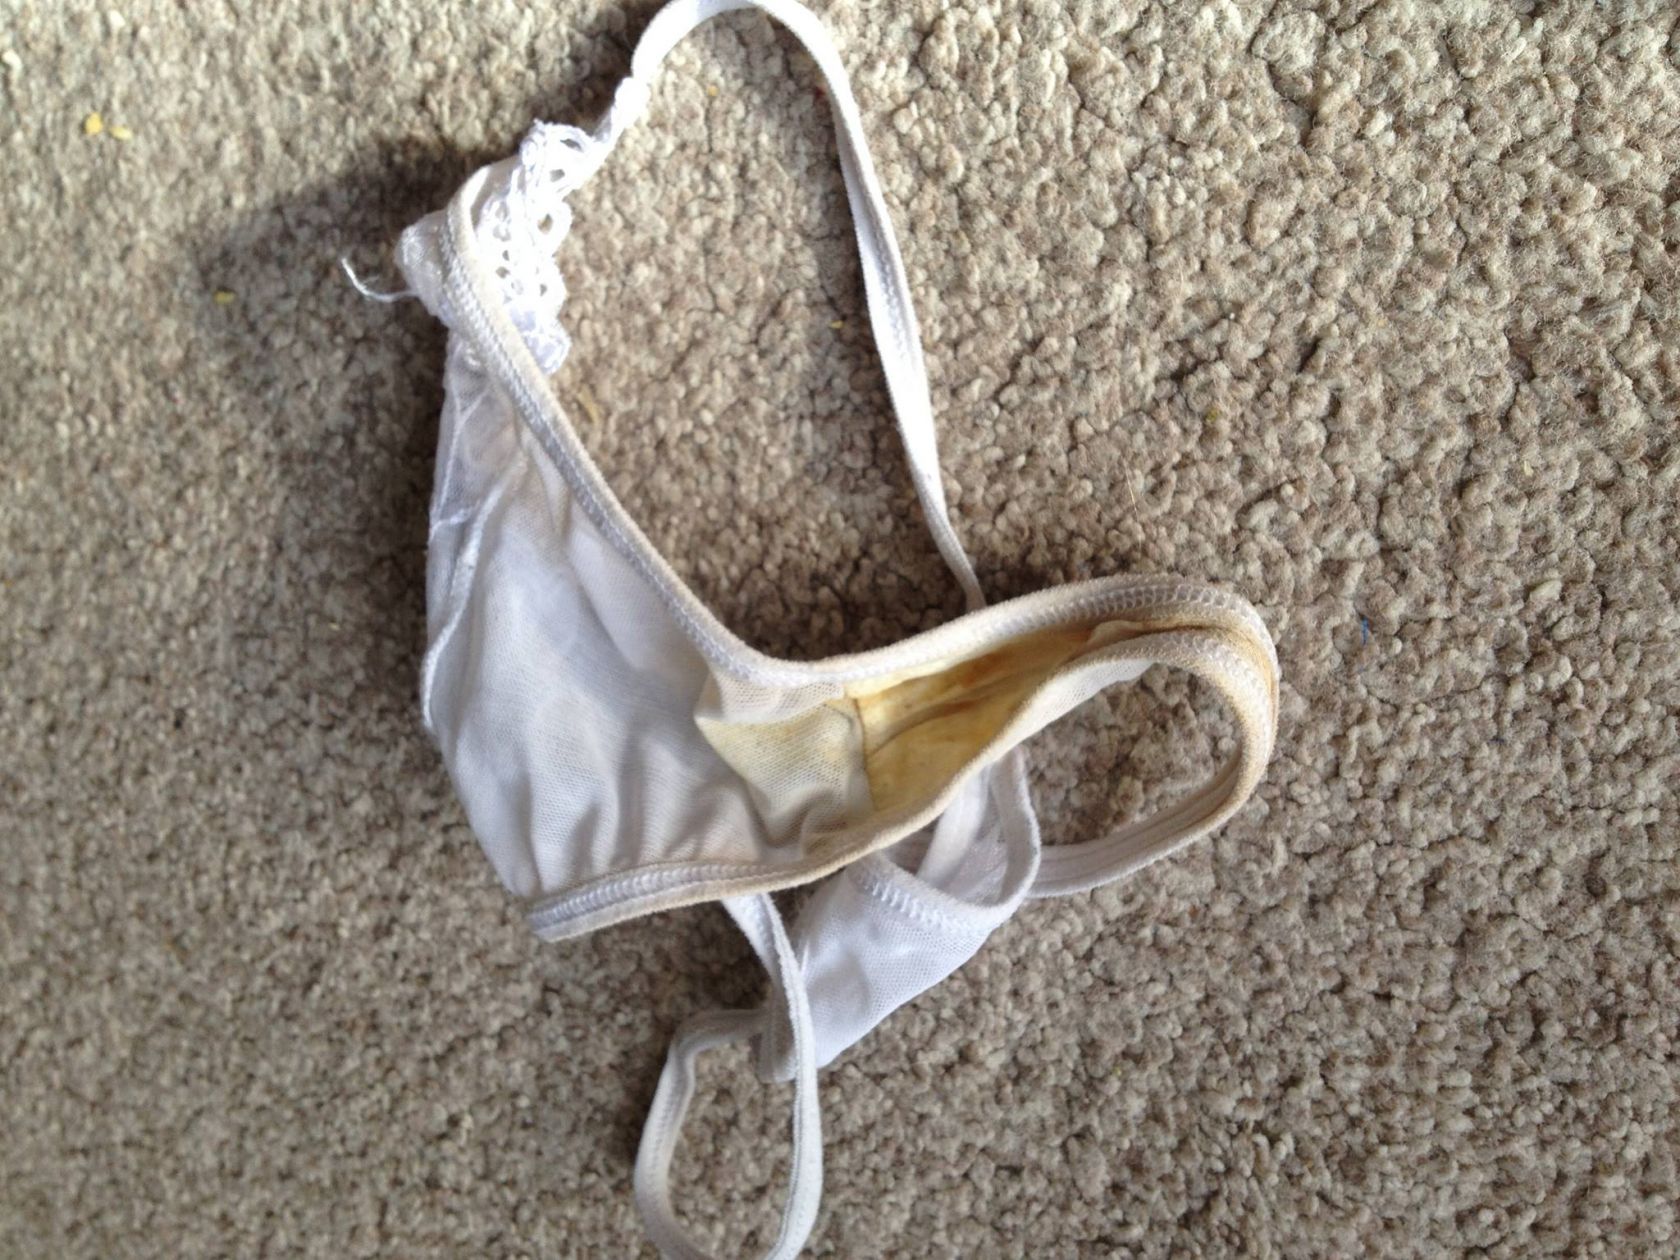 My well worn smelly thong.